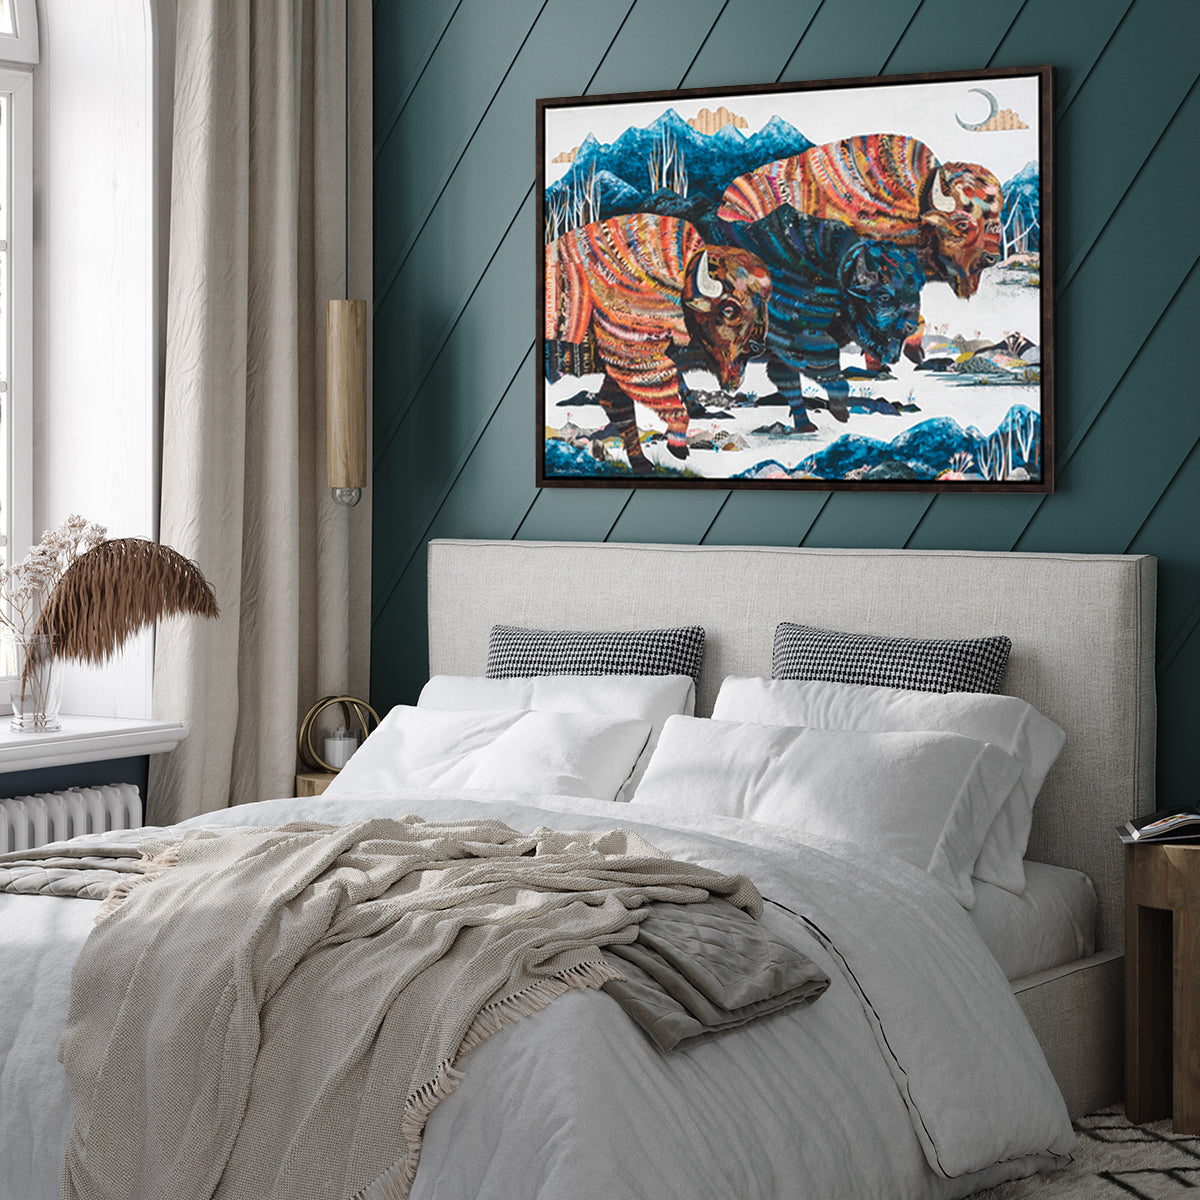 Dolan Geiman Indigo Mountain canvas print depicts a vibrant bison set against a backdrop of majestic mountains. This stunning buffalo art piece makes an eye-catching centerpiece for mountain modern homes.